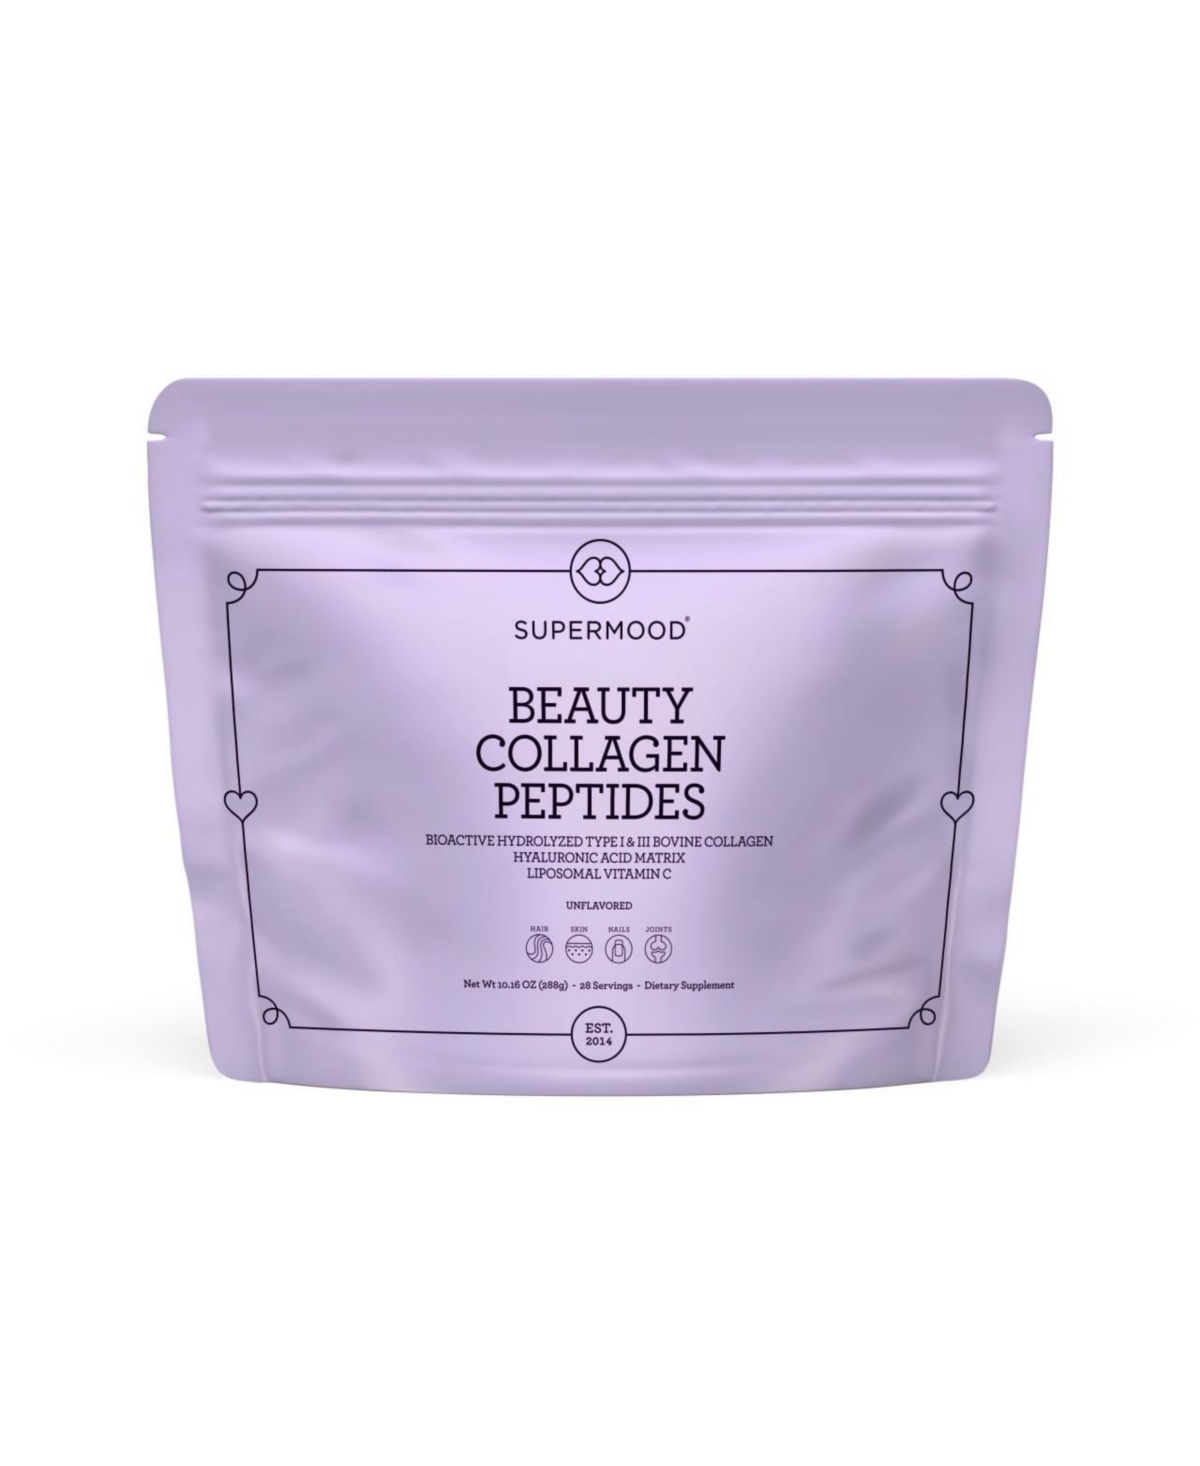 Beauty Collagen Peptides (280g)